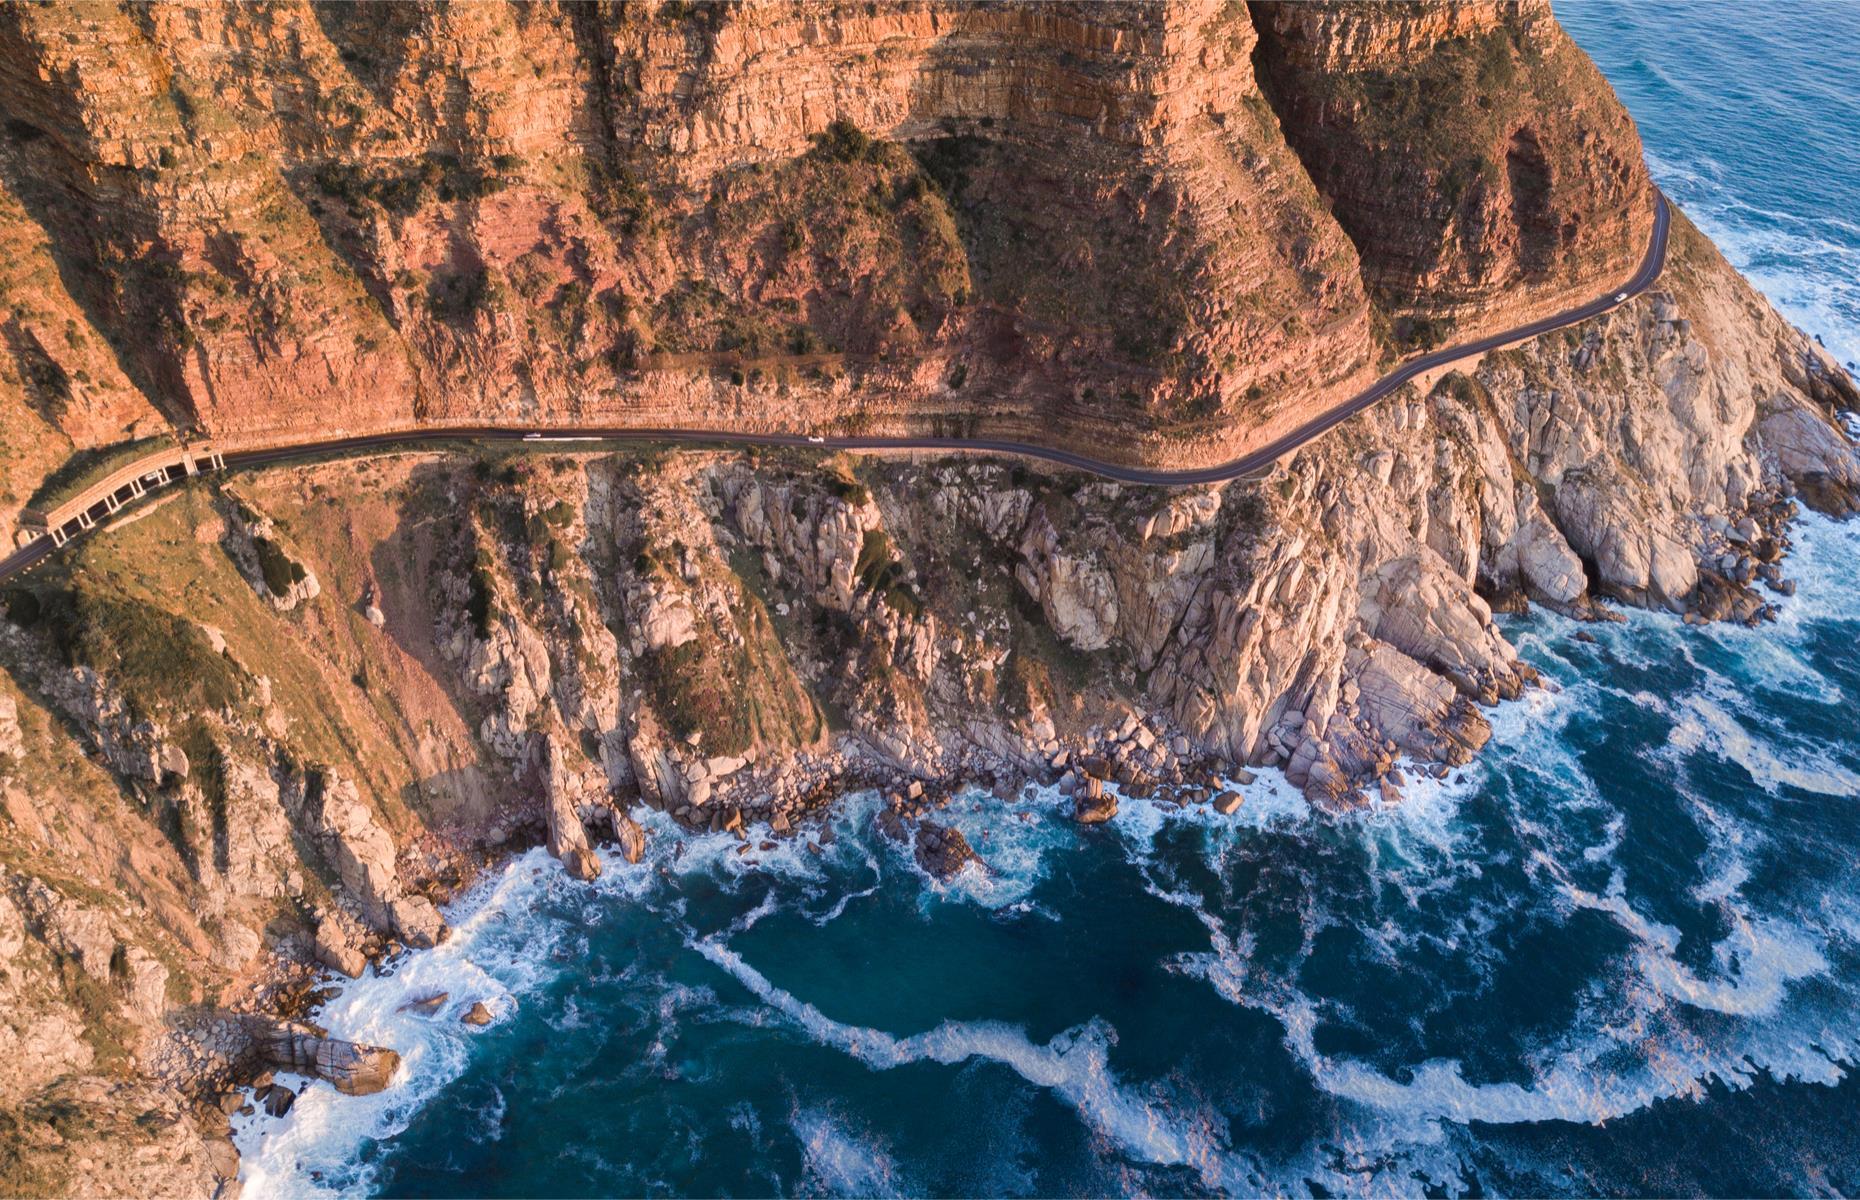 <p>Carved out of the steep and towering cliffs, this impressive roadway hugs an extraordinarily beautiful stretch of Atlantic coastline between Noordhoek and Hout Bay in Cape Town. It was constructed between 1915 and 1922 by convicts. Known as Chappies by locals, the toll road has plenty of places to pull over to stop and enjoy the dramatic views, picnic or spot passing whales. For another great South African drive see our <a href="https://www.loveexploring.com/guides/65670/the-garden-route-south-africa">guide to the Garden Route</a>.</p>